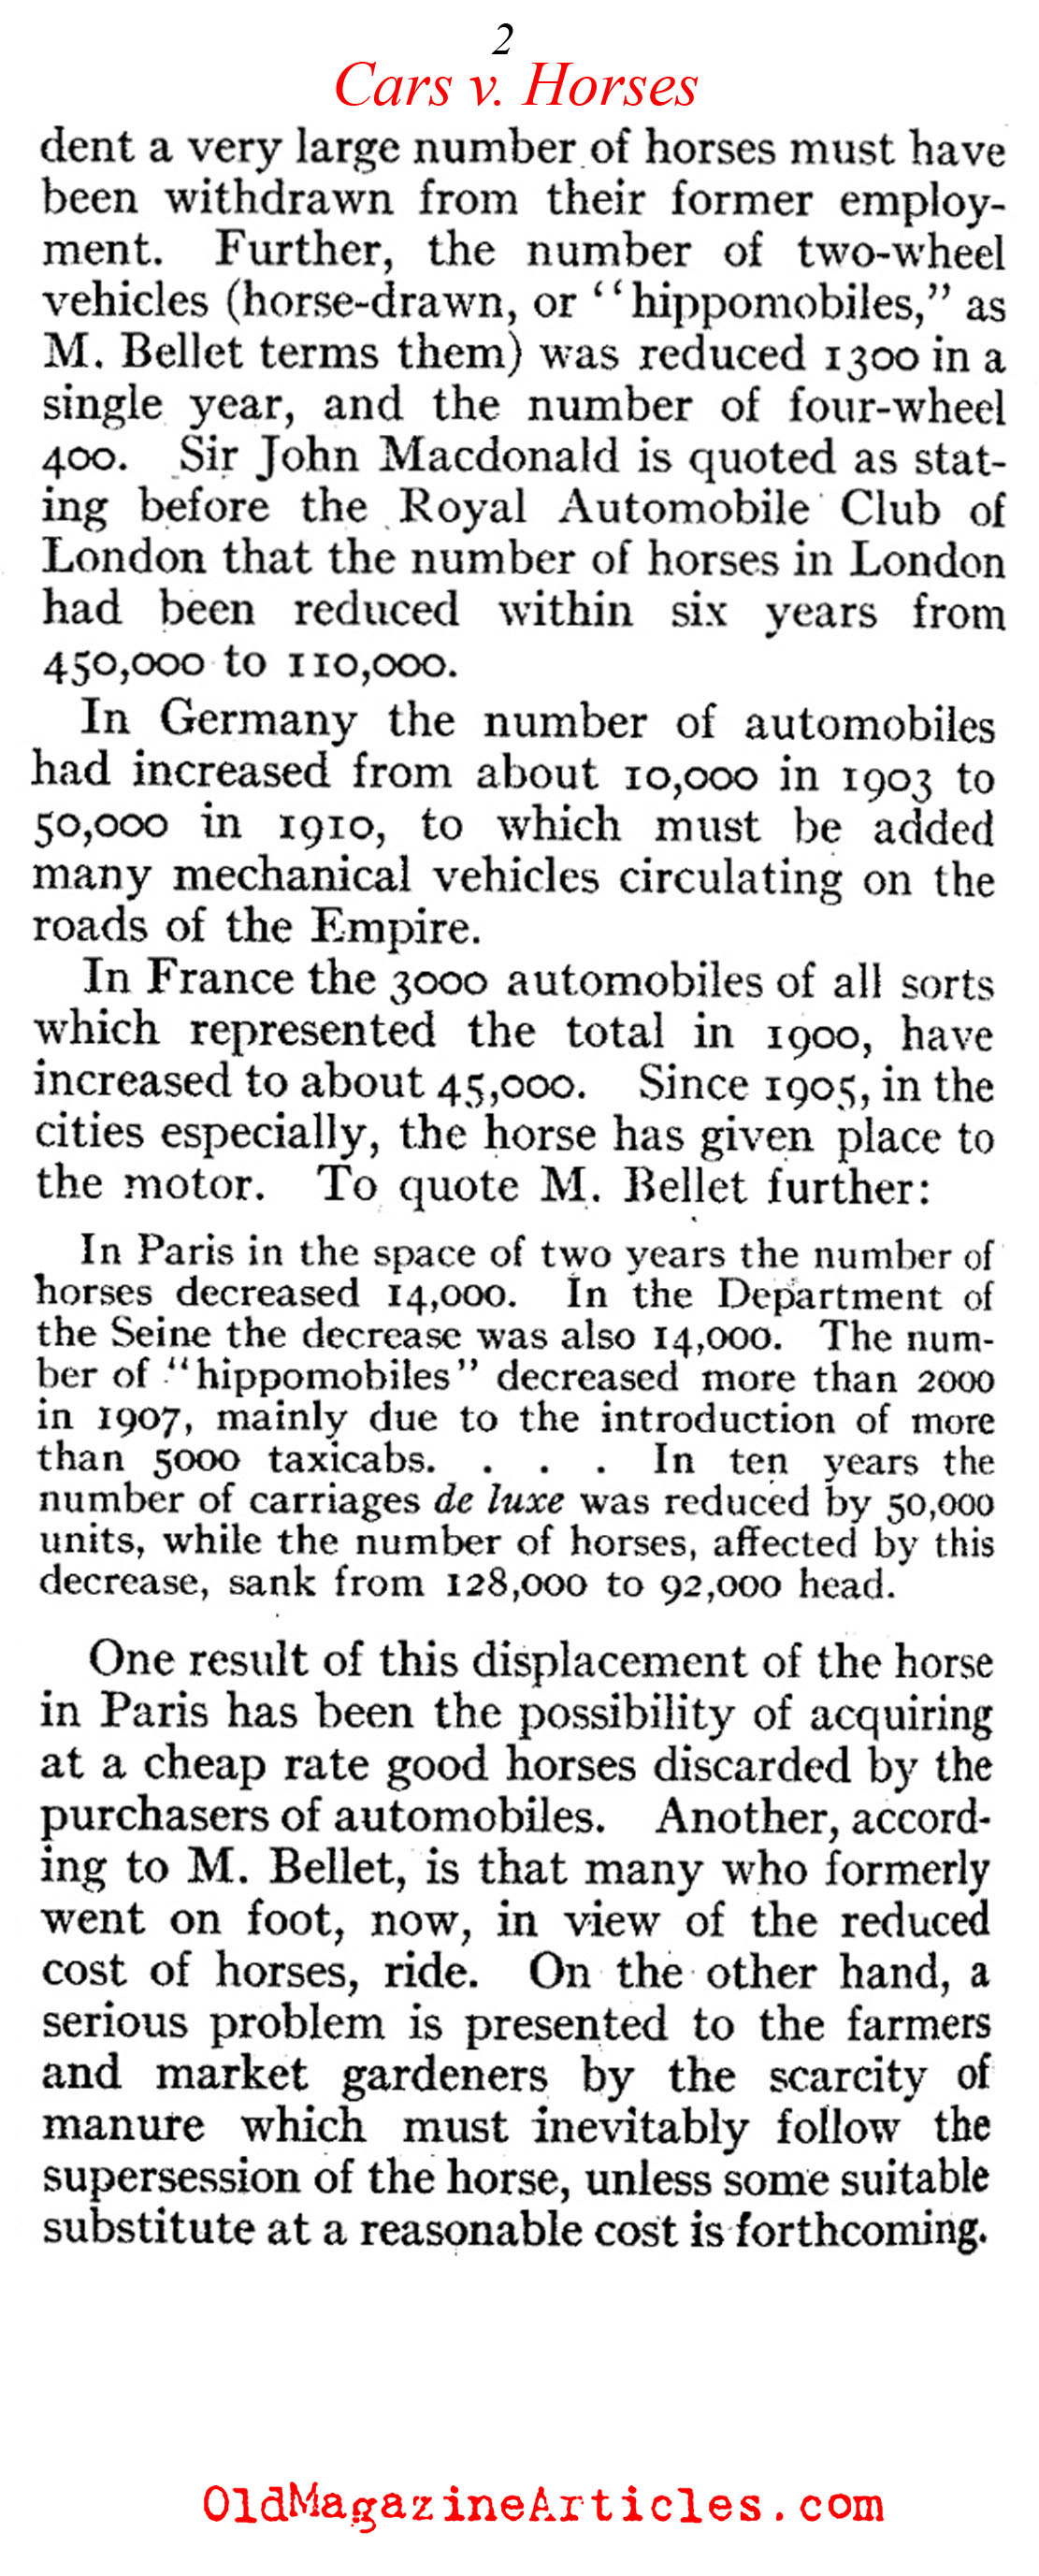 A Dramatic Growth in the Number of Cars (Review of Reviews, 1910)